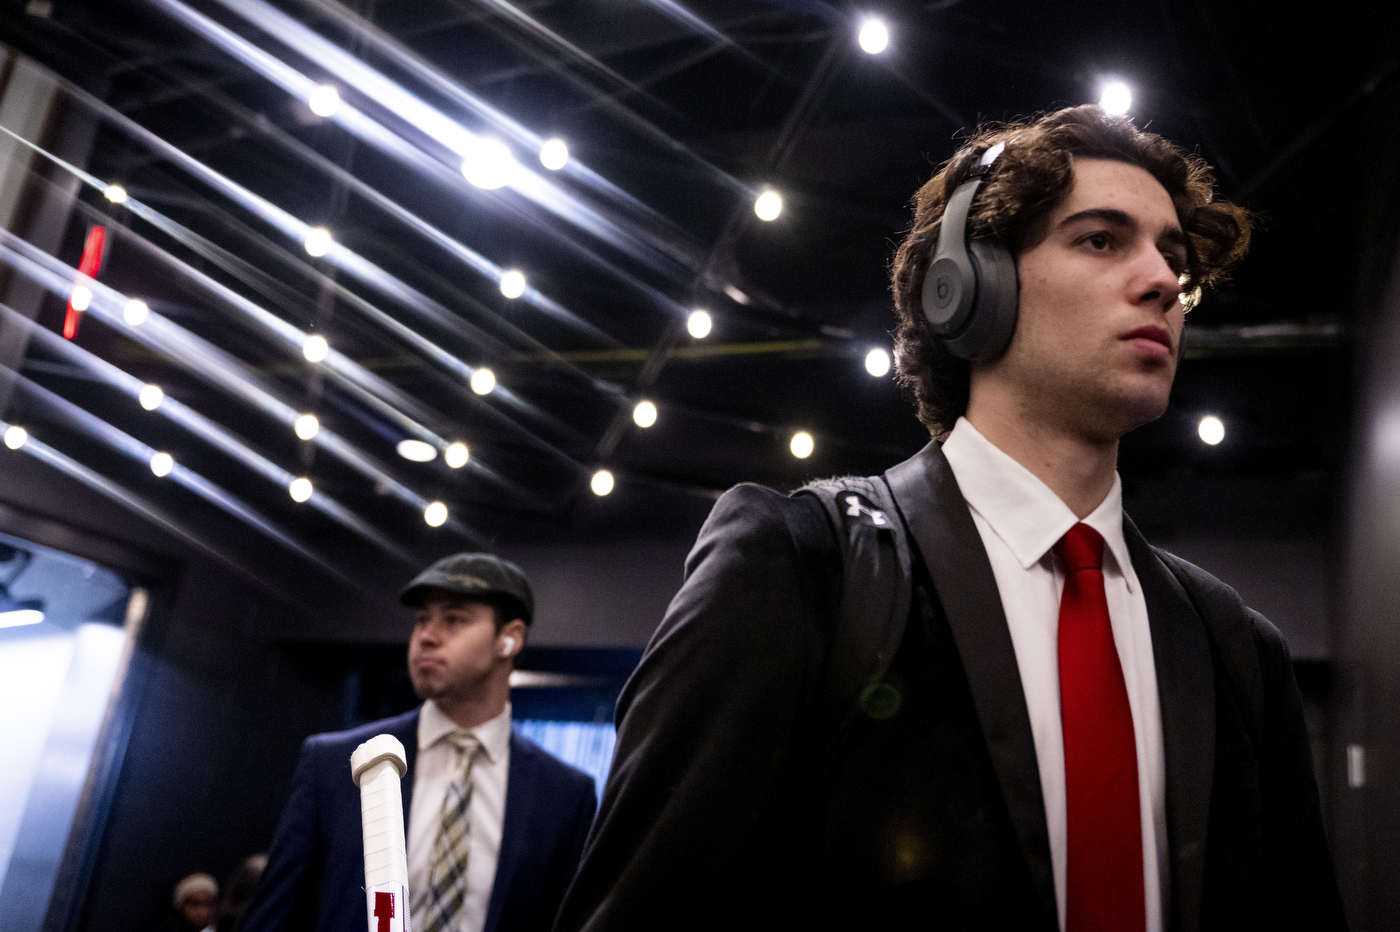 mens hockey player wearing a suit and headphones pre game